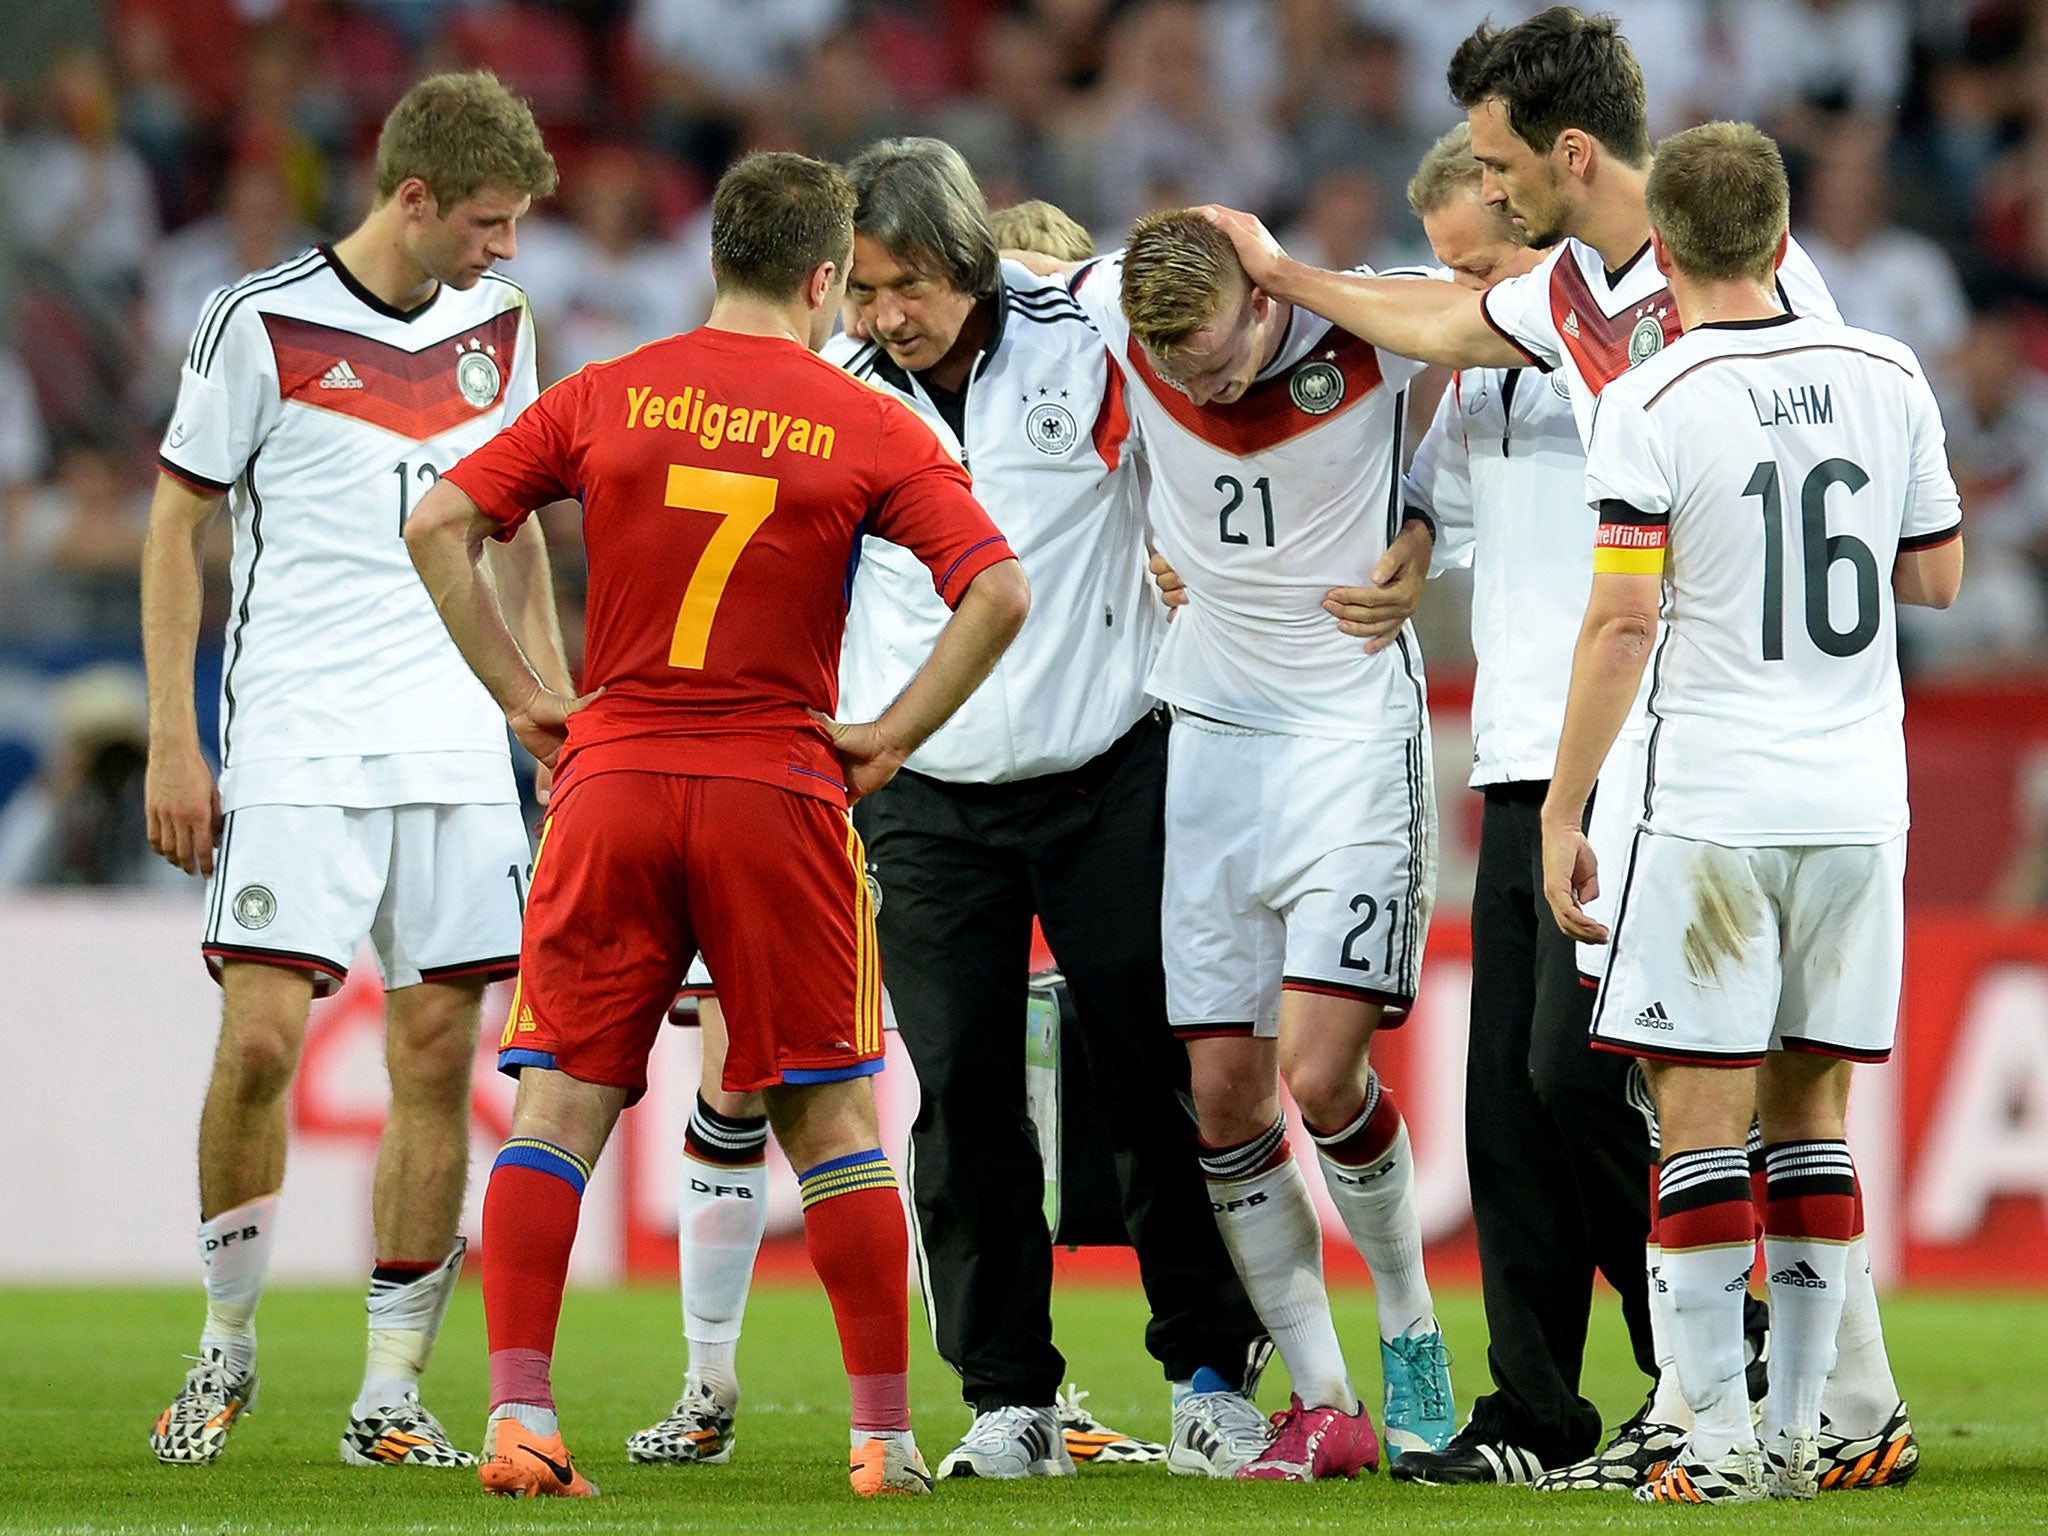 Marco Reus is helped from the pitch after suffering an ankle injury in the friendly between Germany and Armenia